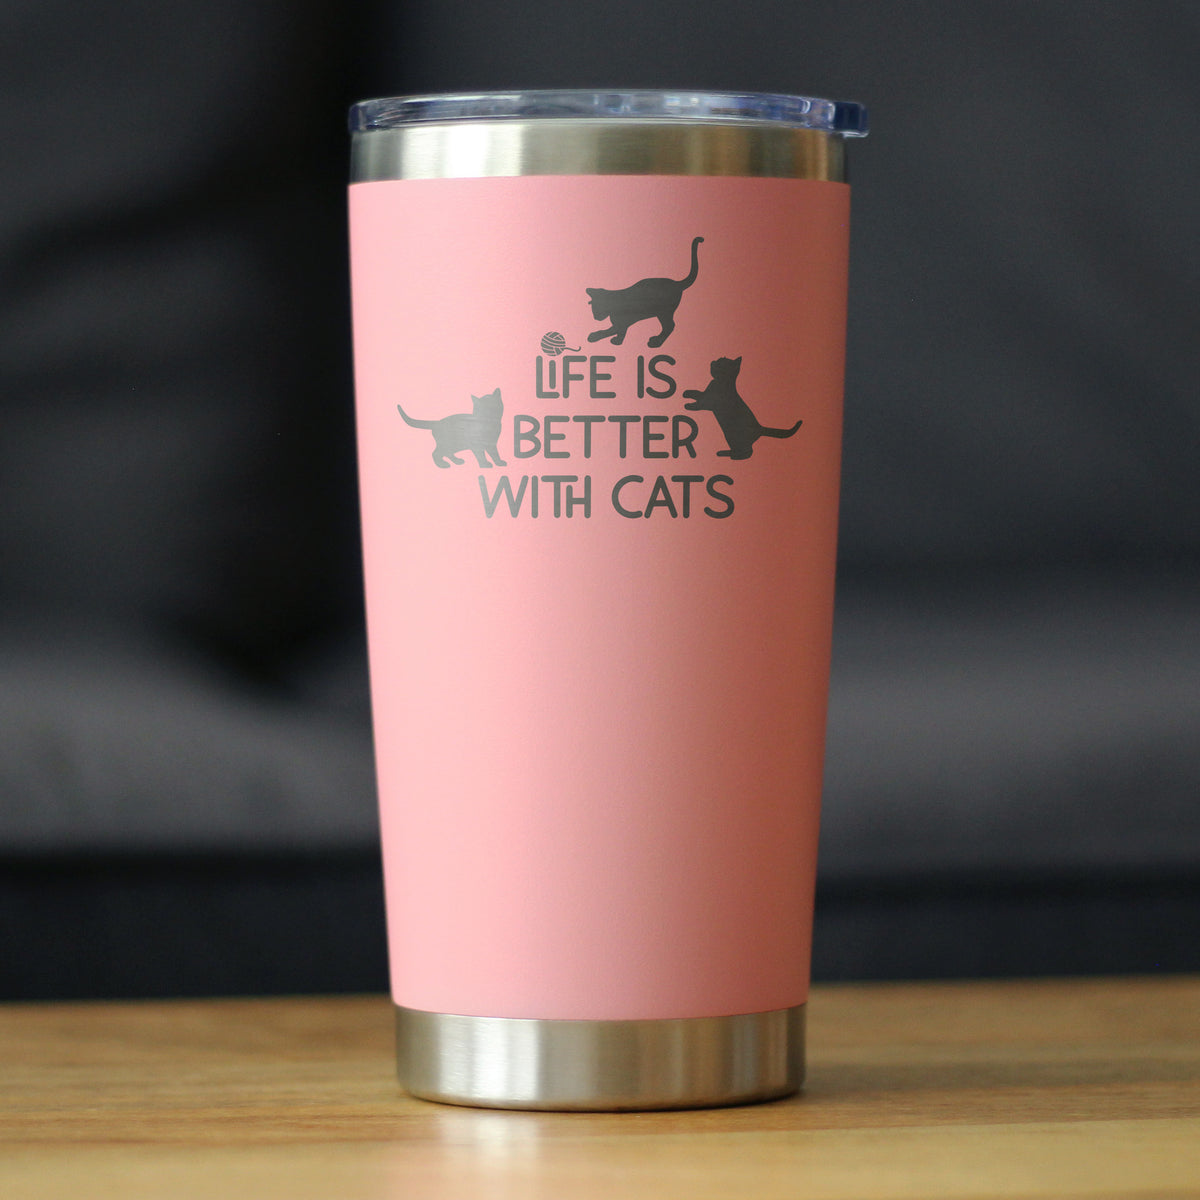 Life is Better With Cats - Insulated Coffee Tumbler Cup with Sliding Lid - Stainless Steel Travel Mug - Cat Gifts for Women and Men